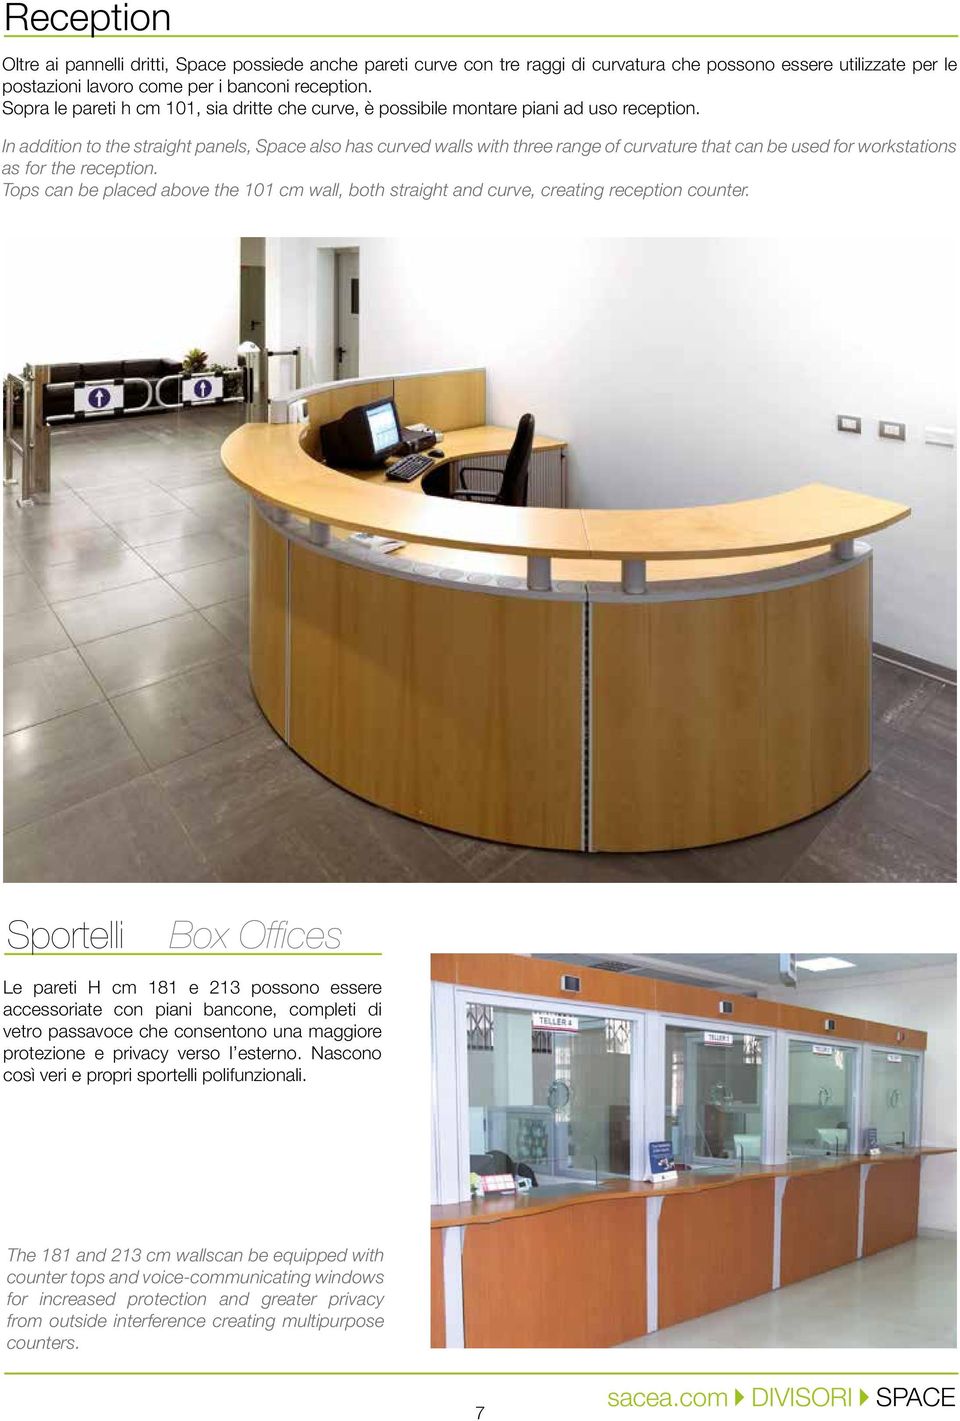 In addition to the straight panels, Space also has curved walls with three range of curvature that can be used for workstations as for the reception.